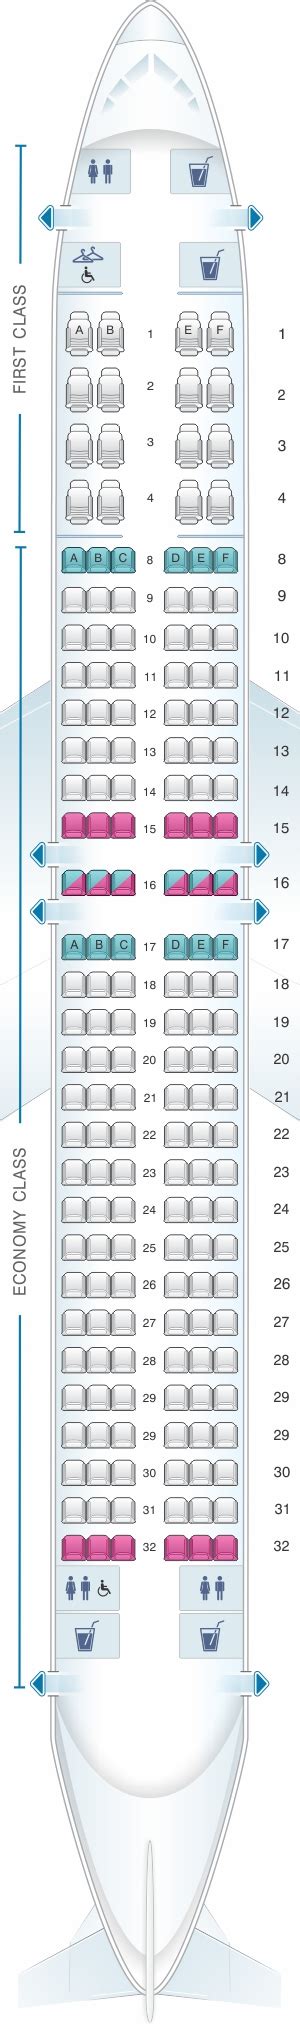 Boeing Seat Map American Airlines Elcho Table